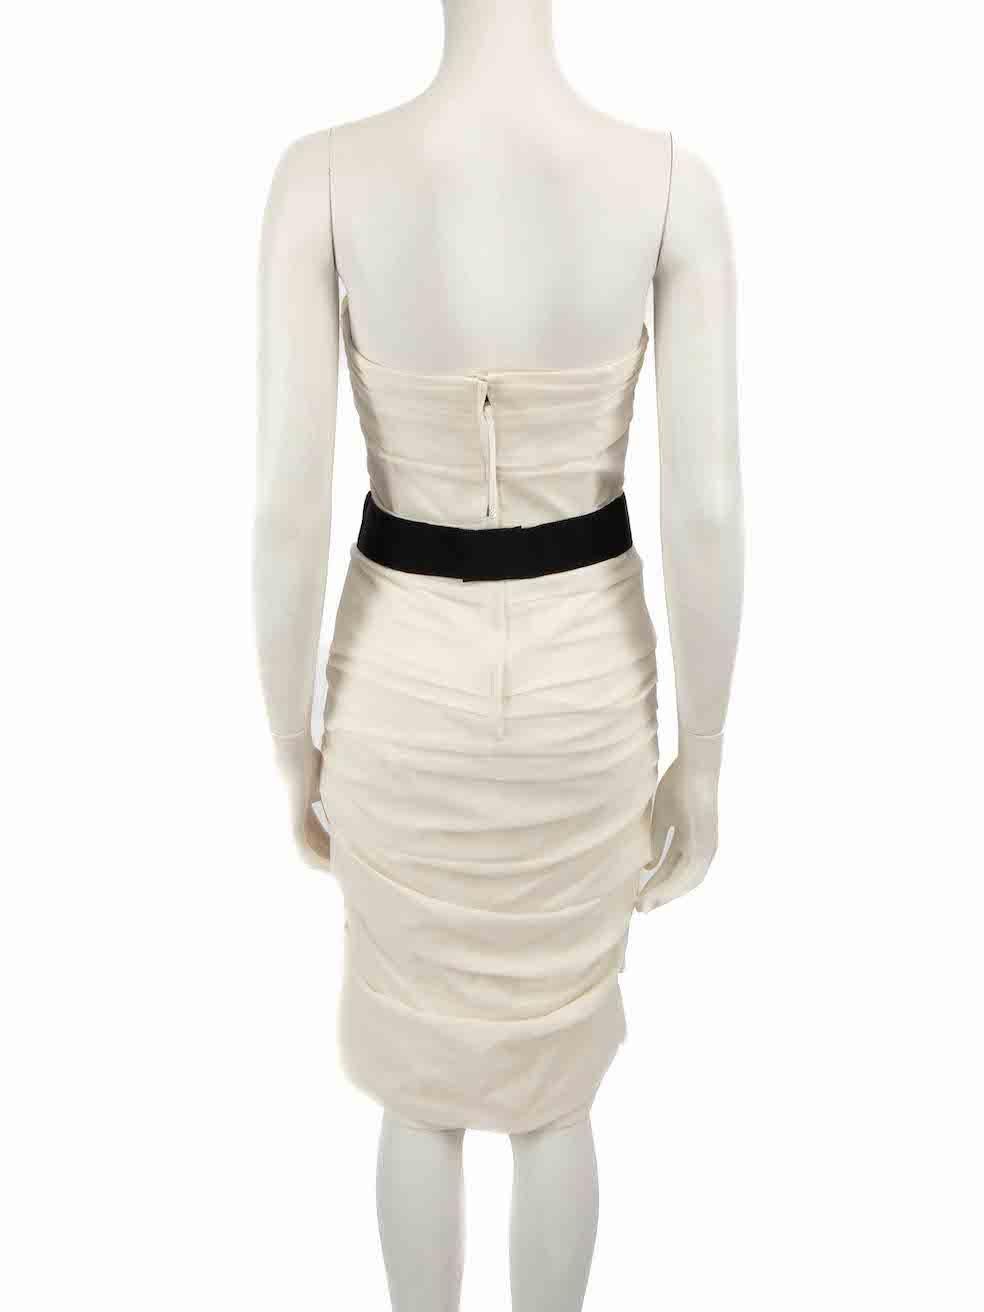 Dolce & Gabbana White Gathered Strapless Dress Size M In Good Condition For Sale In London, GB